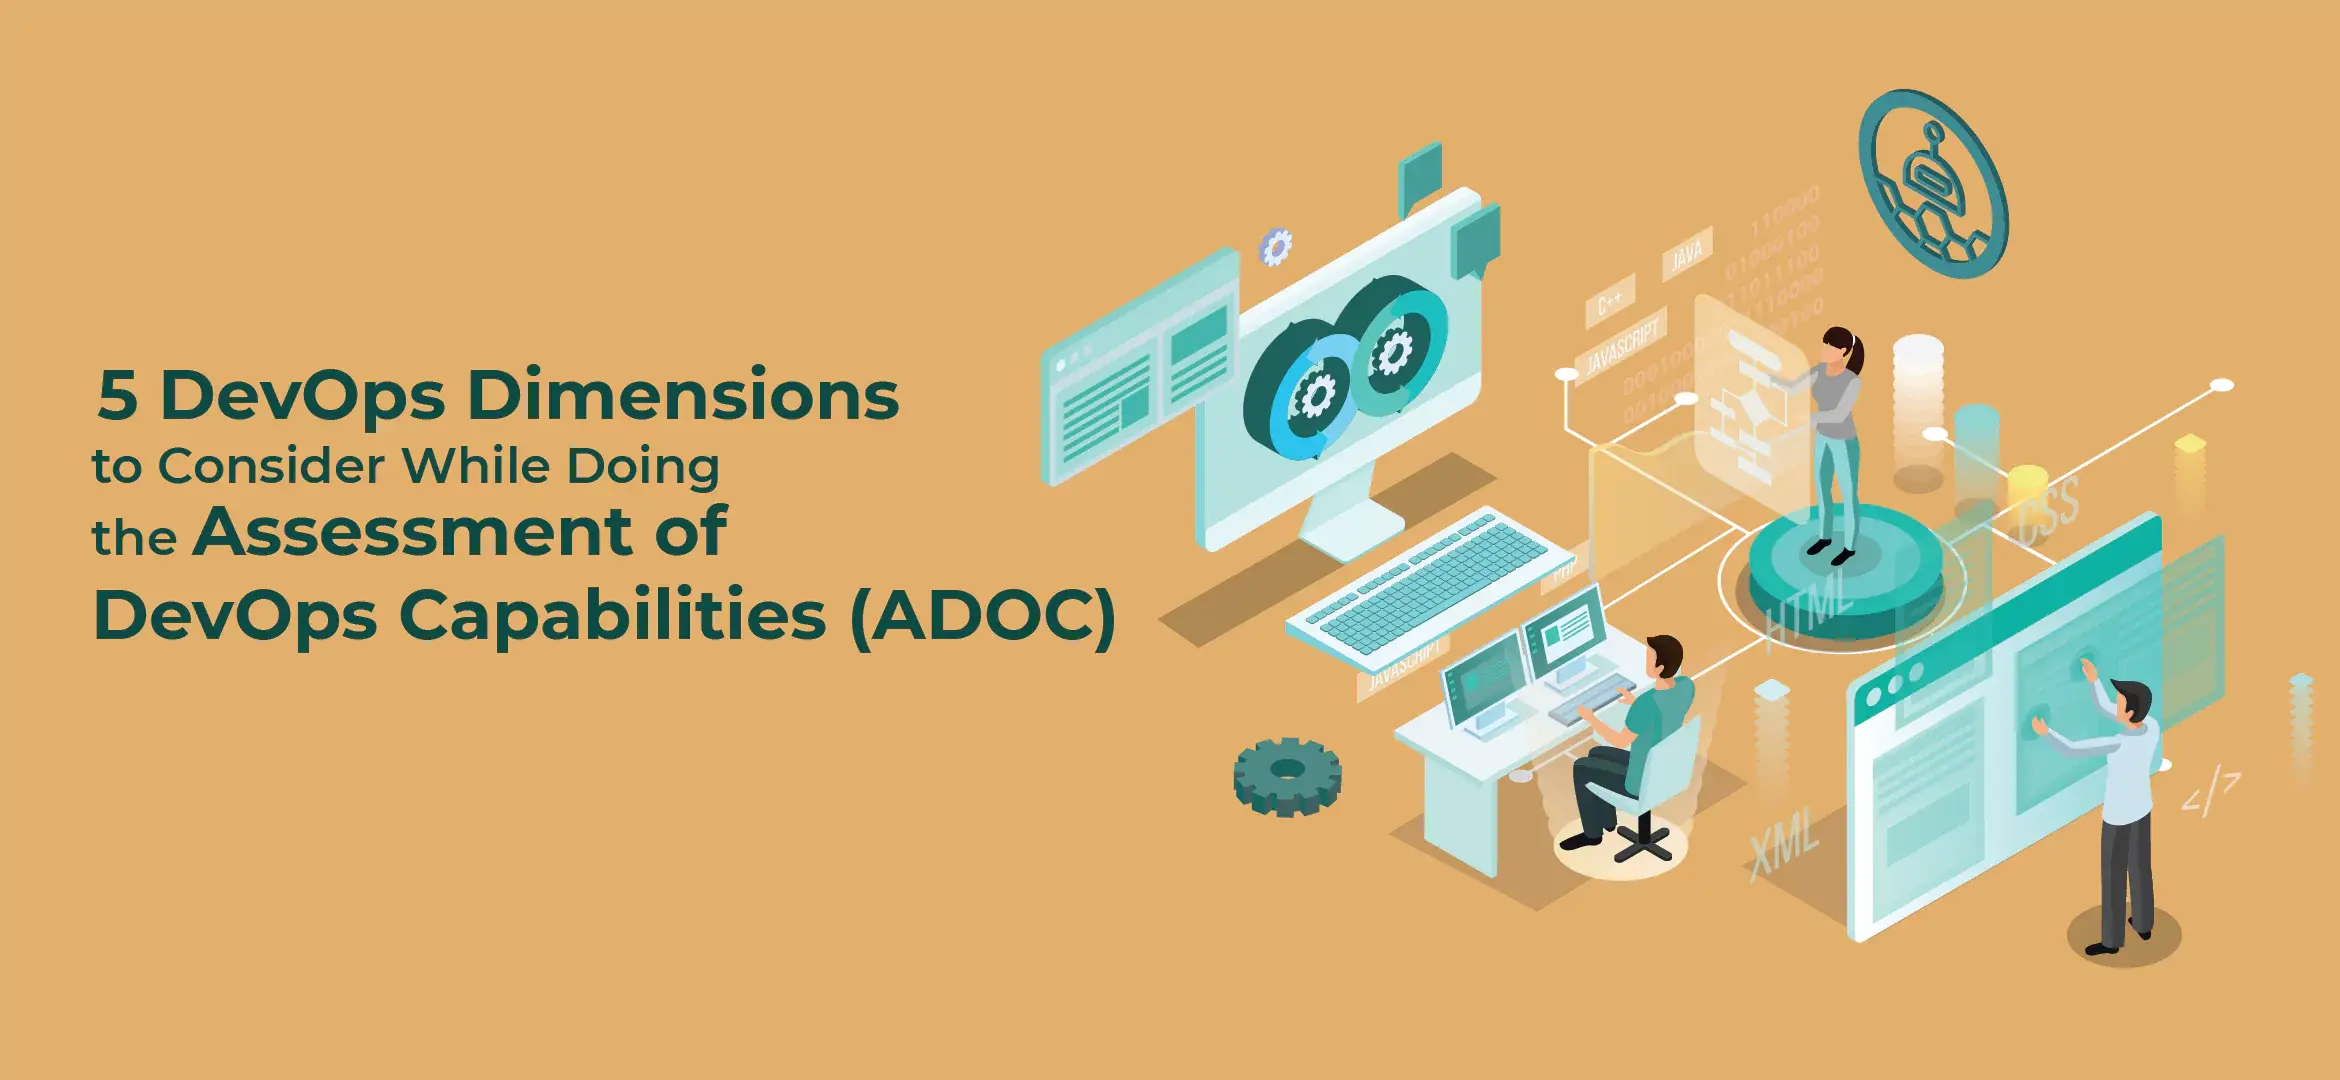 5 DevOps Dimensions to Consider While Doing the Assessment of DevOps Capabilities (ADOC)